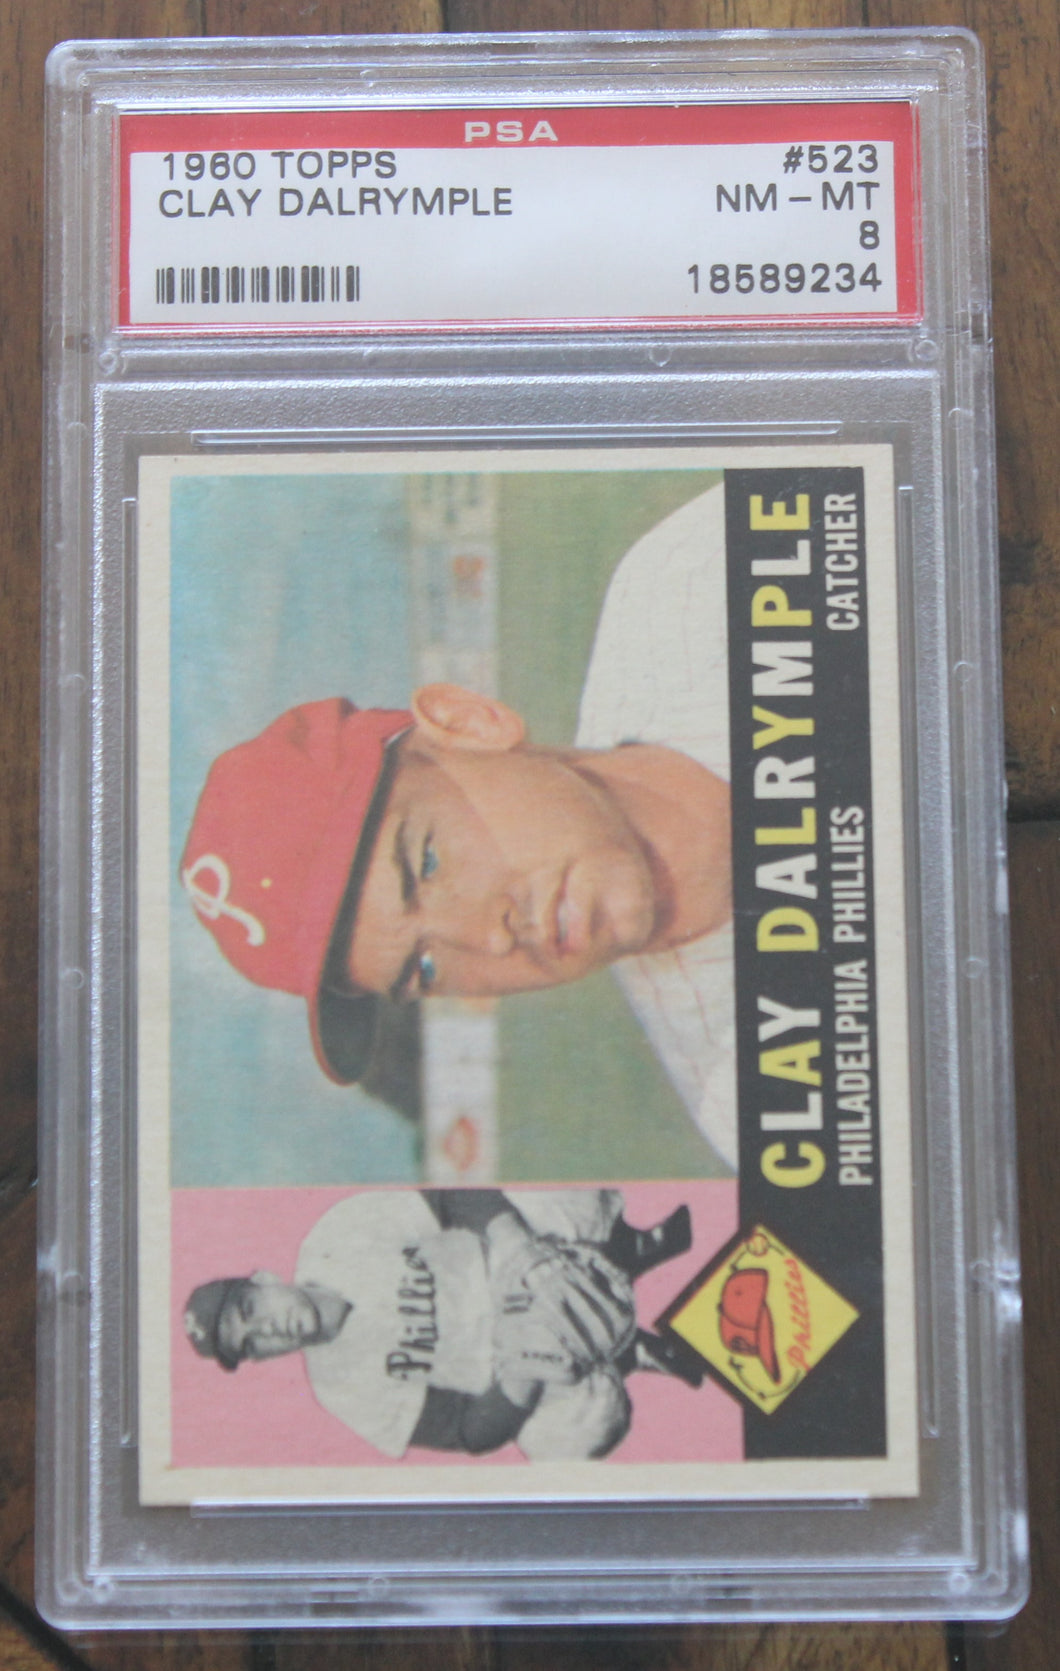 1960 Topps Clay Dalrymple #523 PSA NM-MT 8